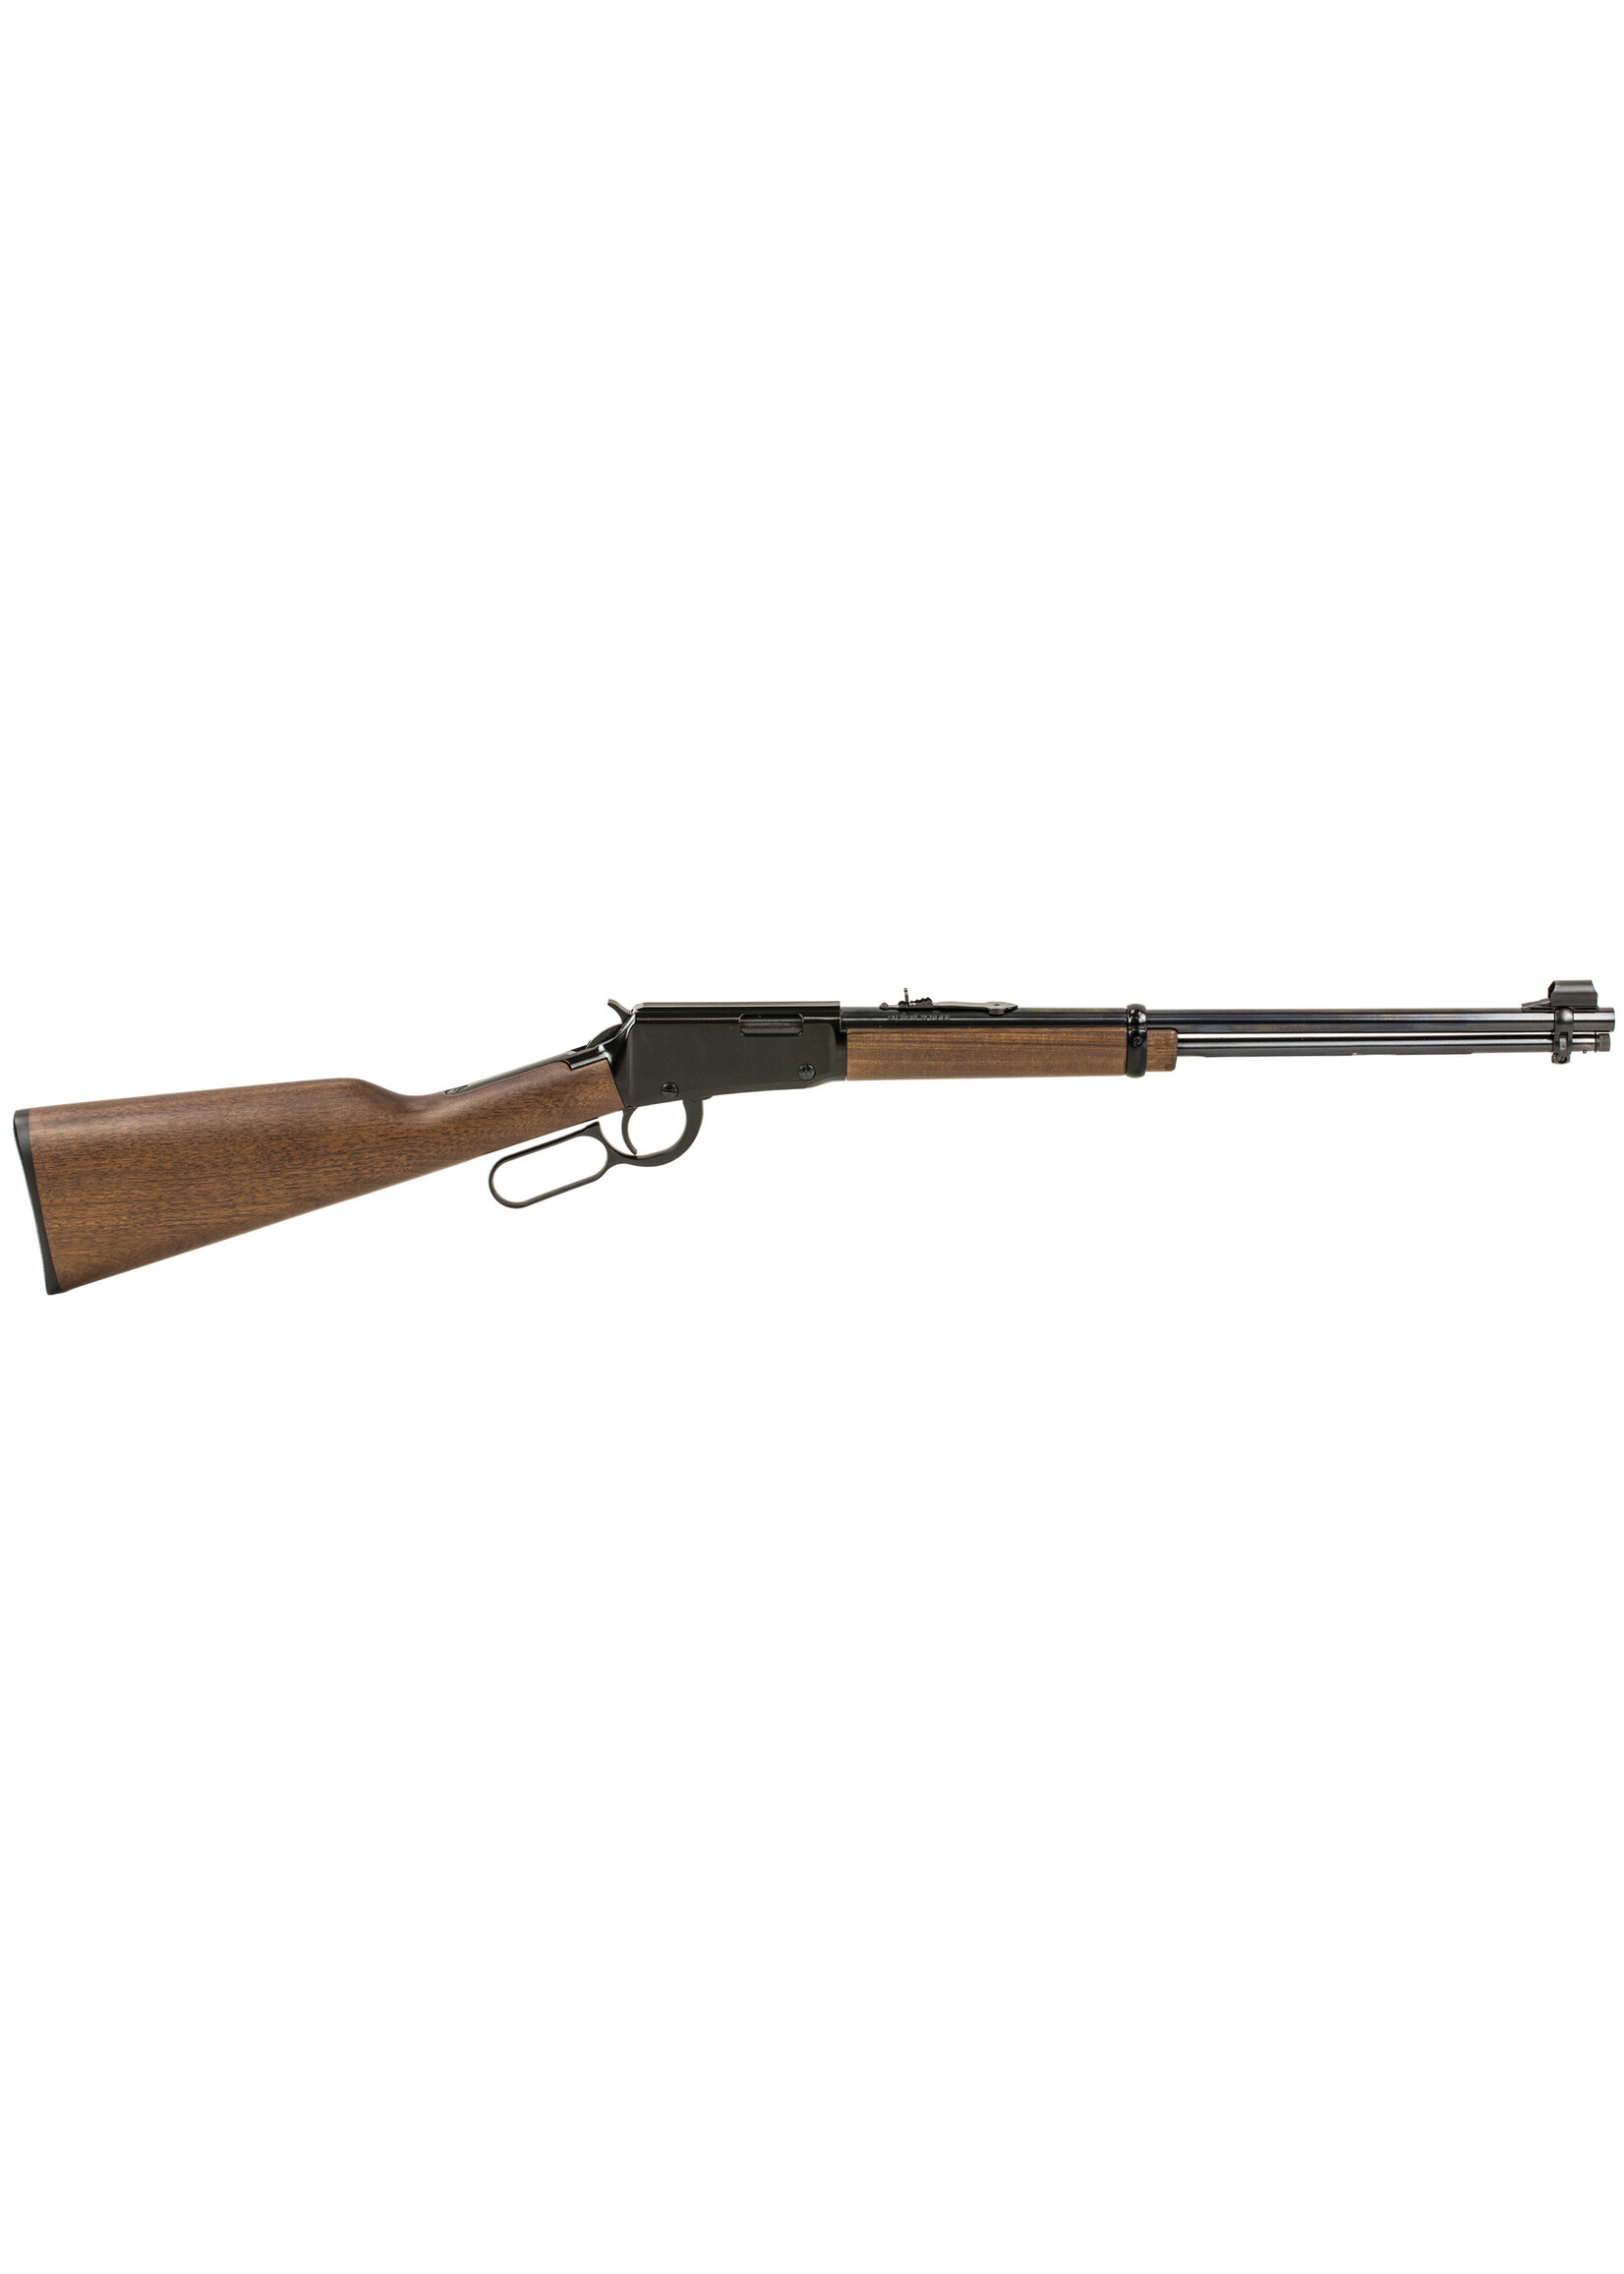 HENRY REPEATING ARMS HENRY REPEATING ARMS CLASSIC LEVER ACTION .22LR 15RD 18.5"